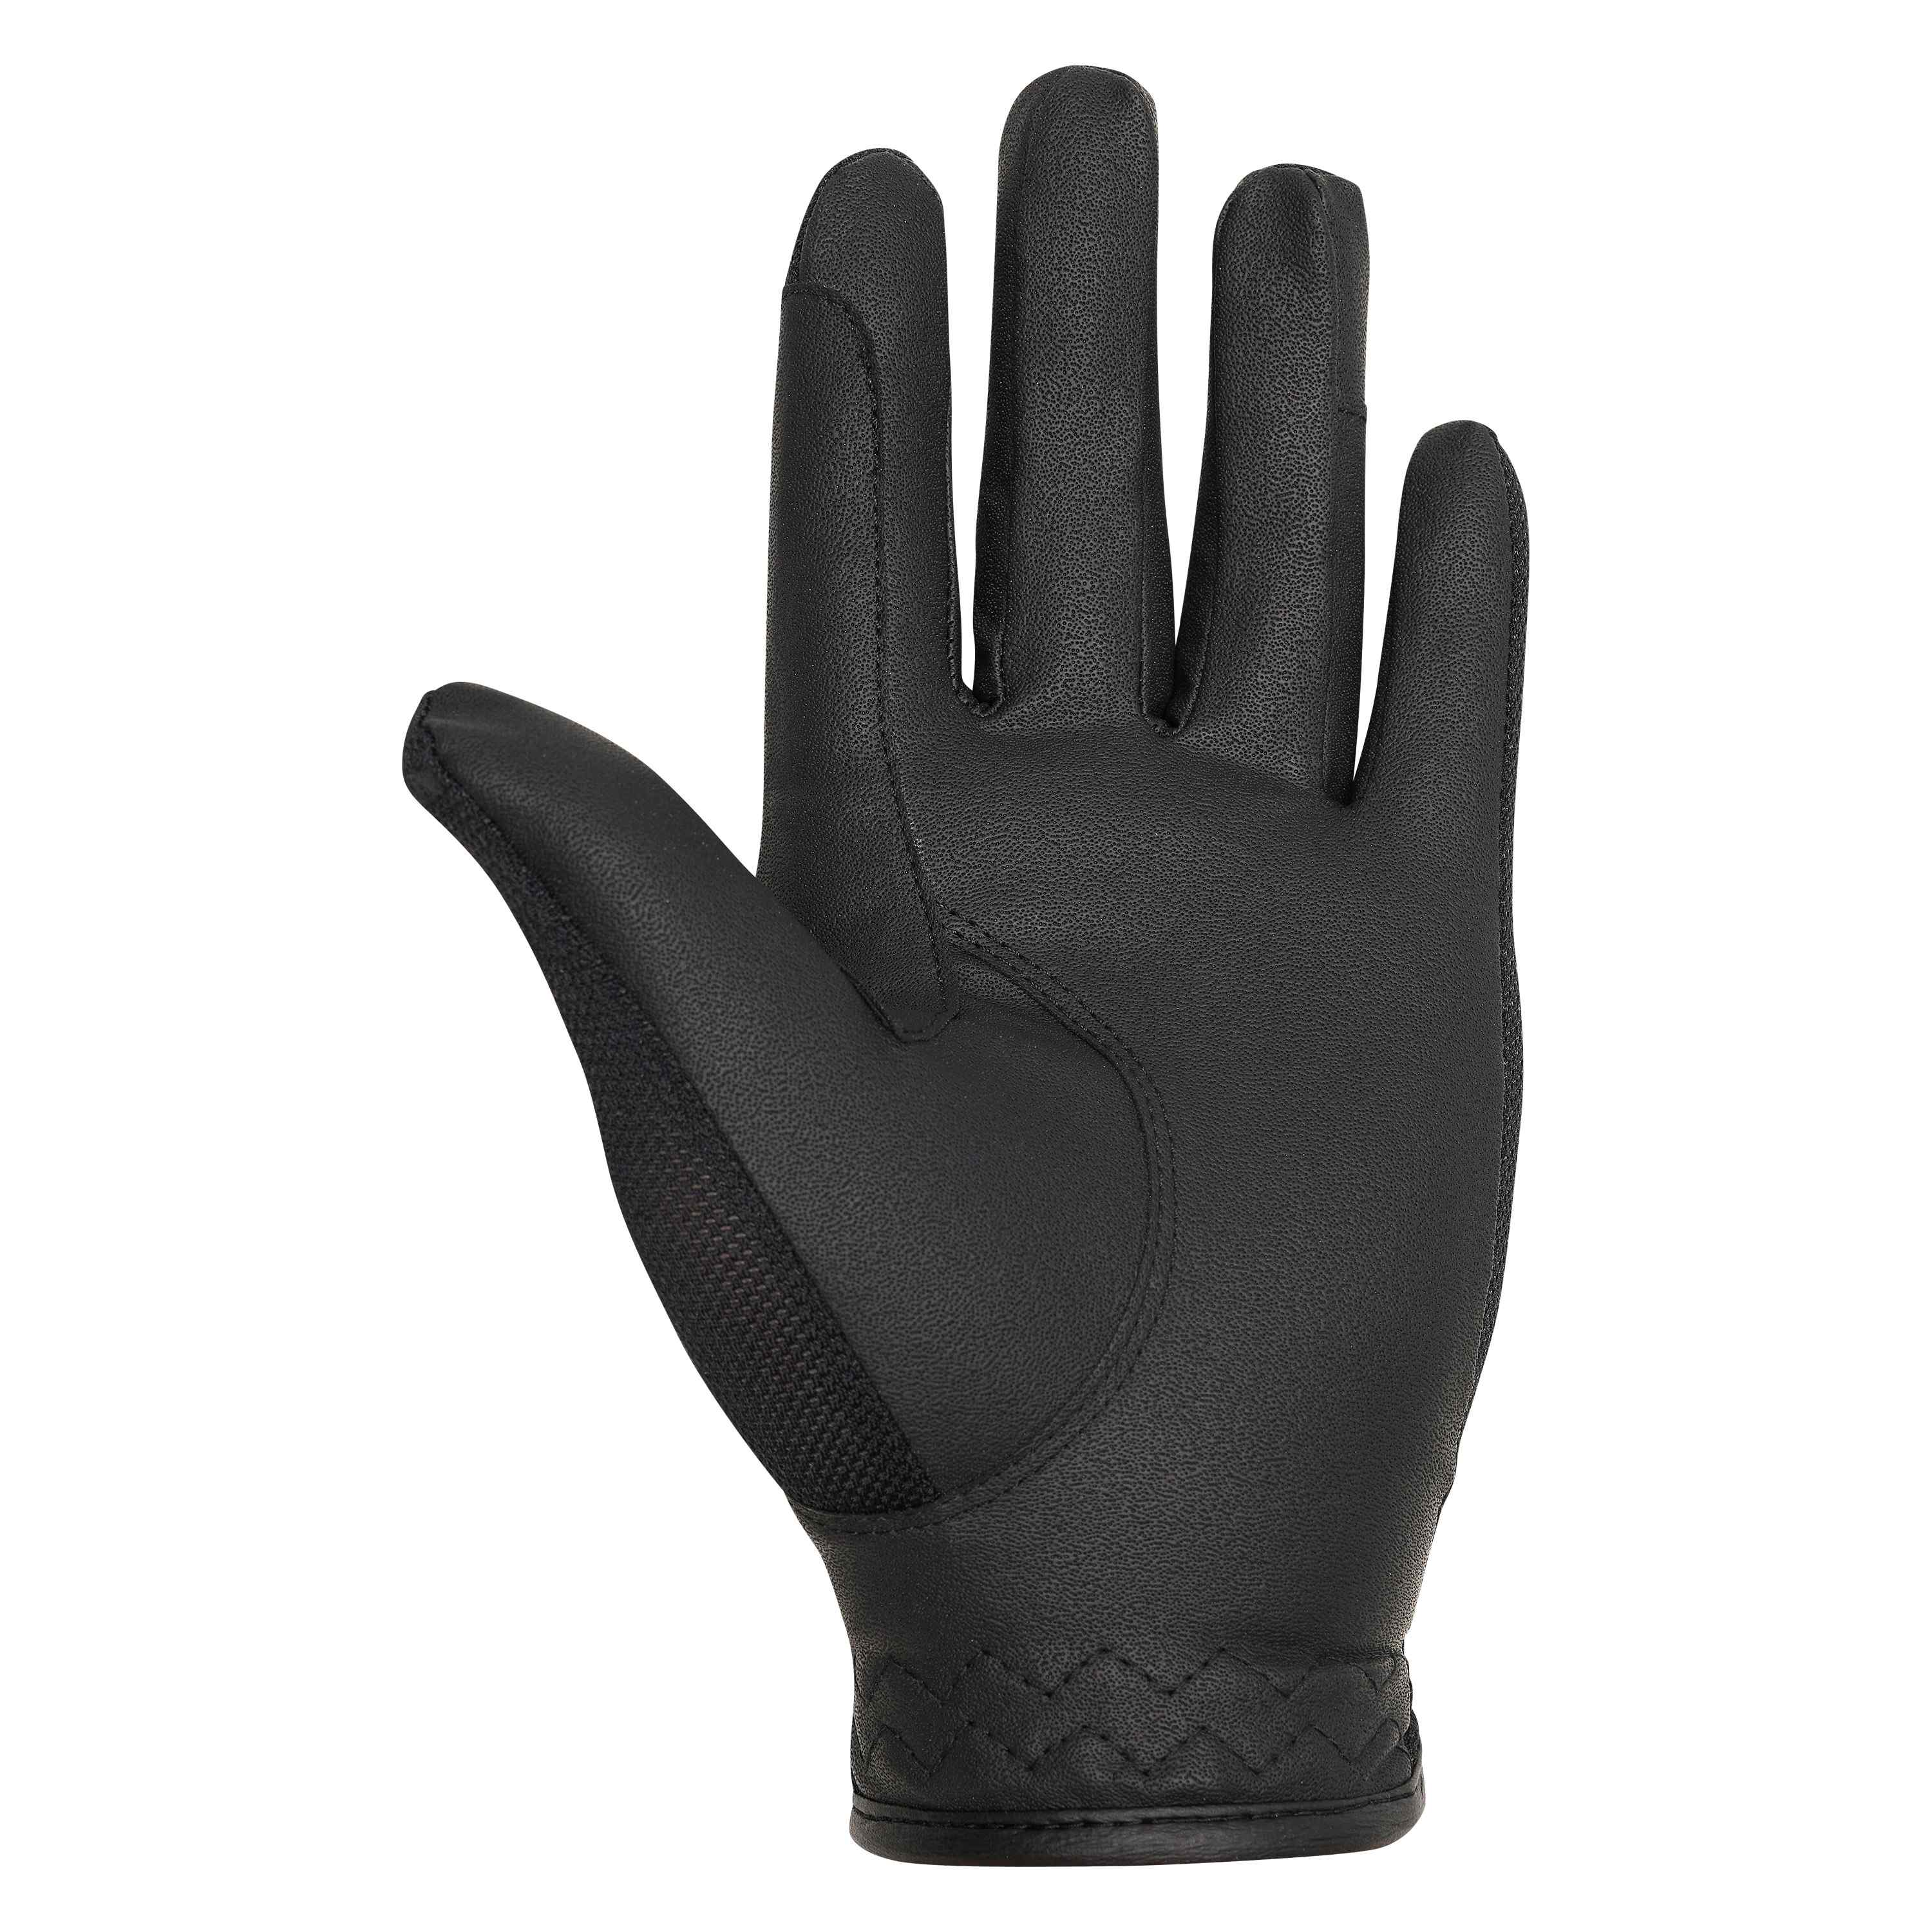 Imperial Riding | Handschuhe Summercool - Black | S